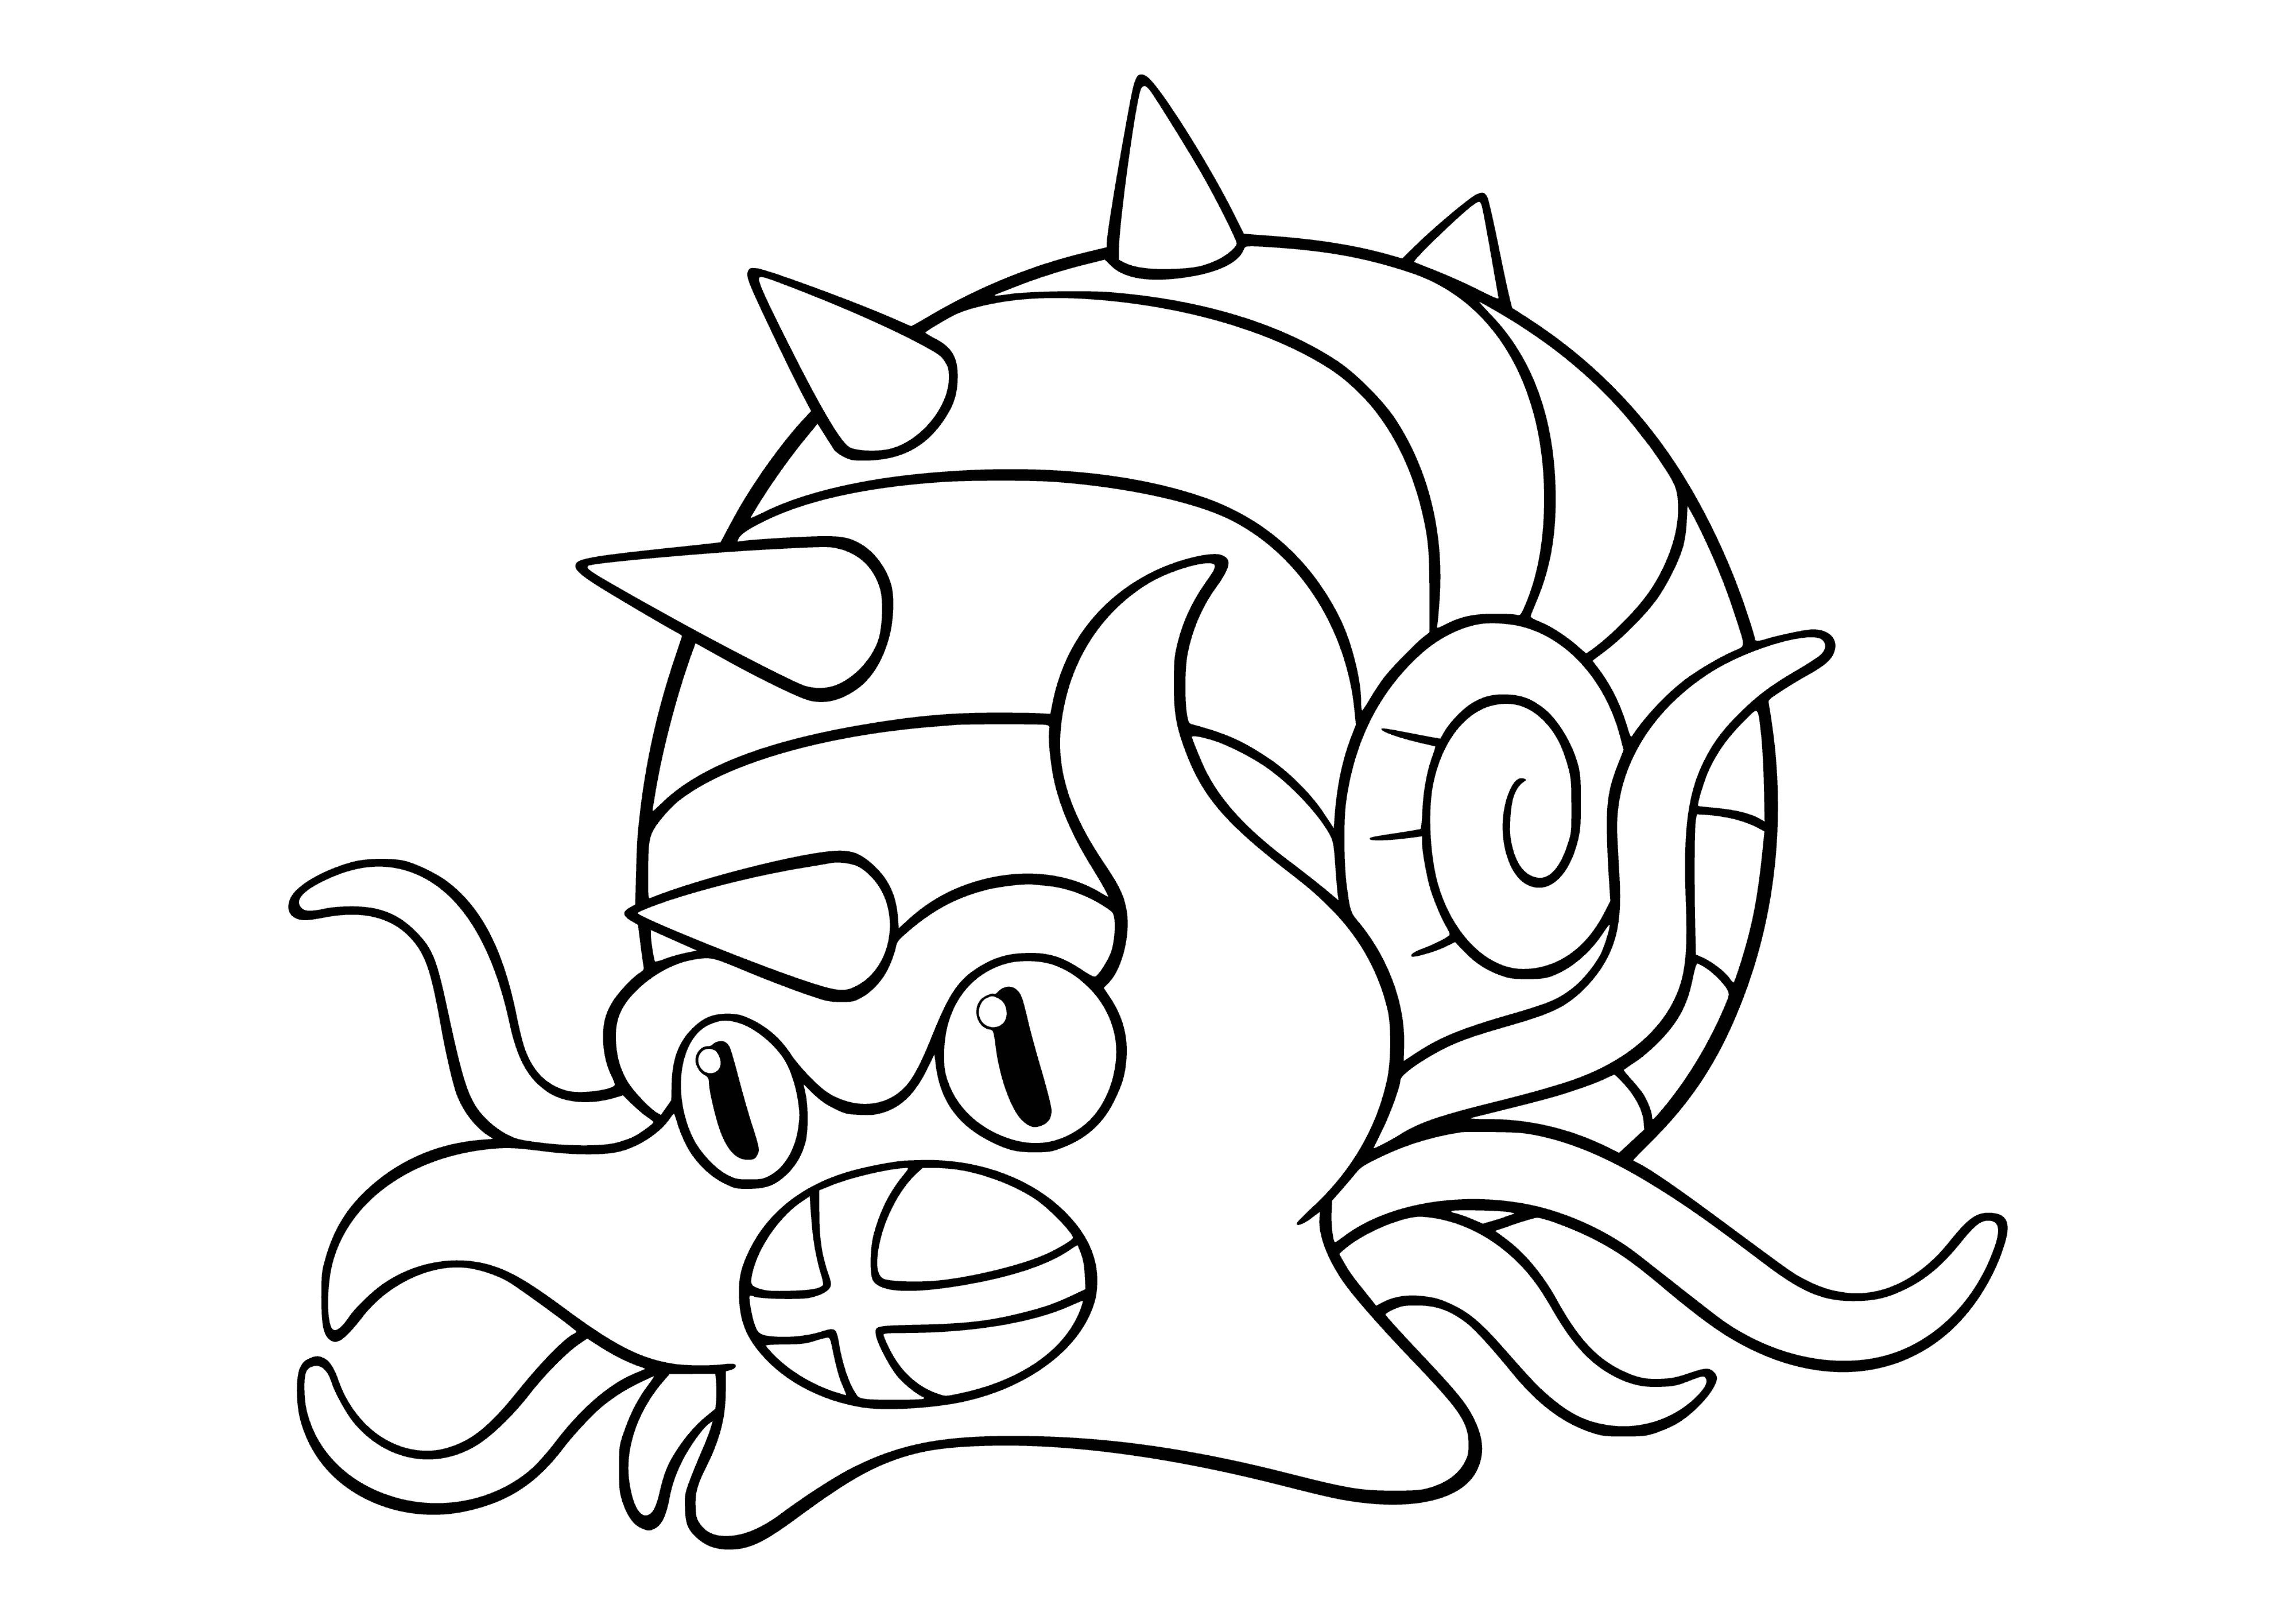 coloring page: Omastar is a blue-shelled Pokemon with four tentacles, a small mouth and red eyes.